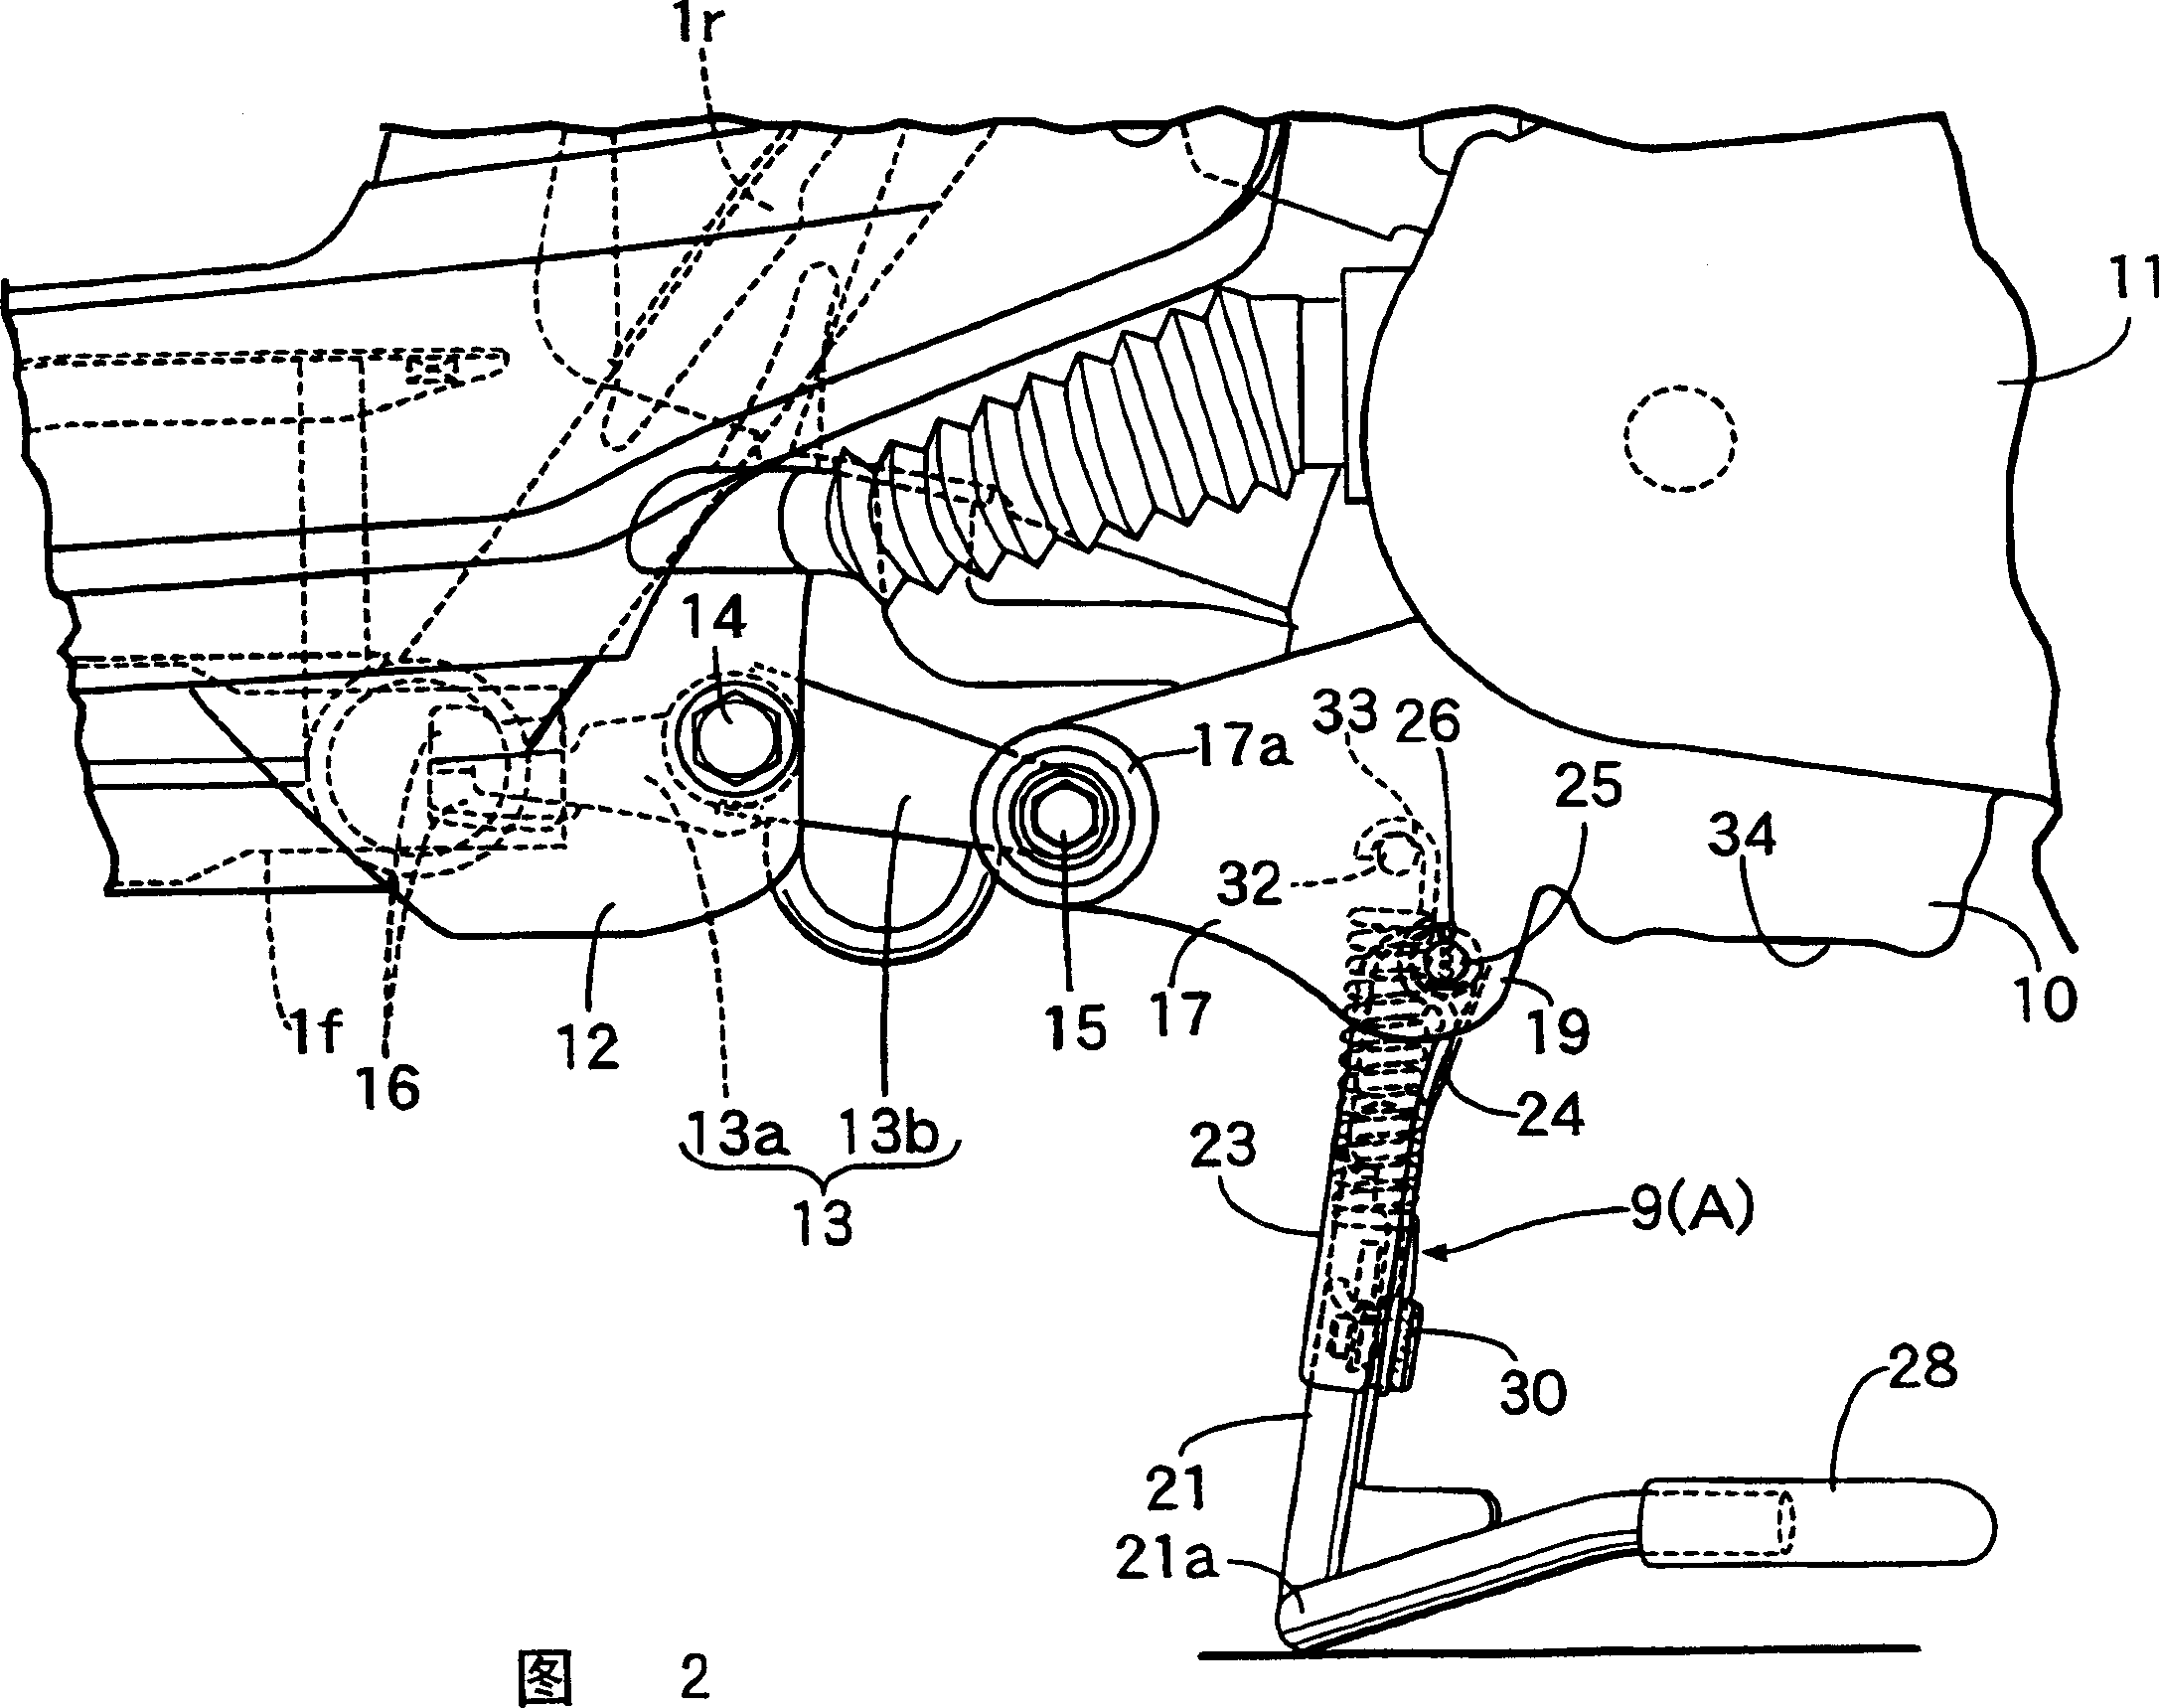 Support gear of motor two-wheel cycle